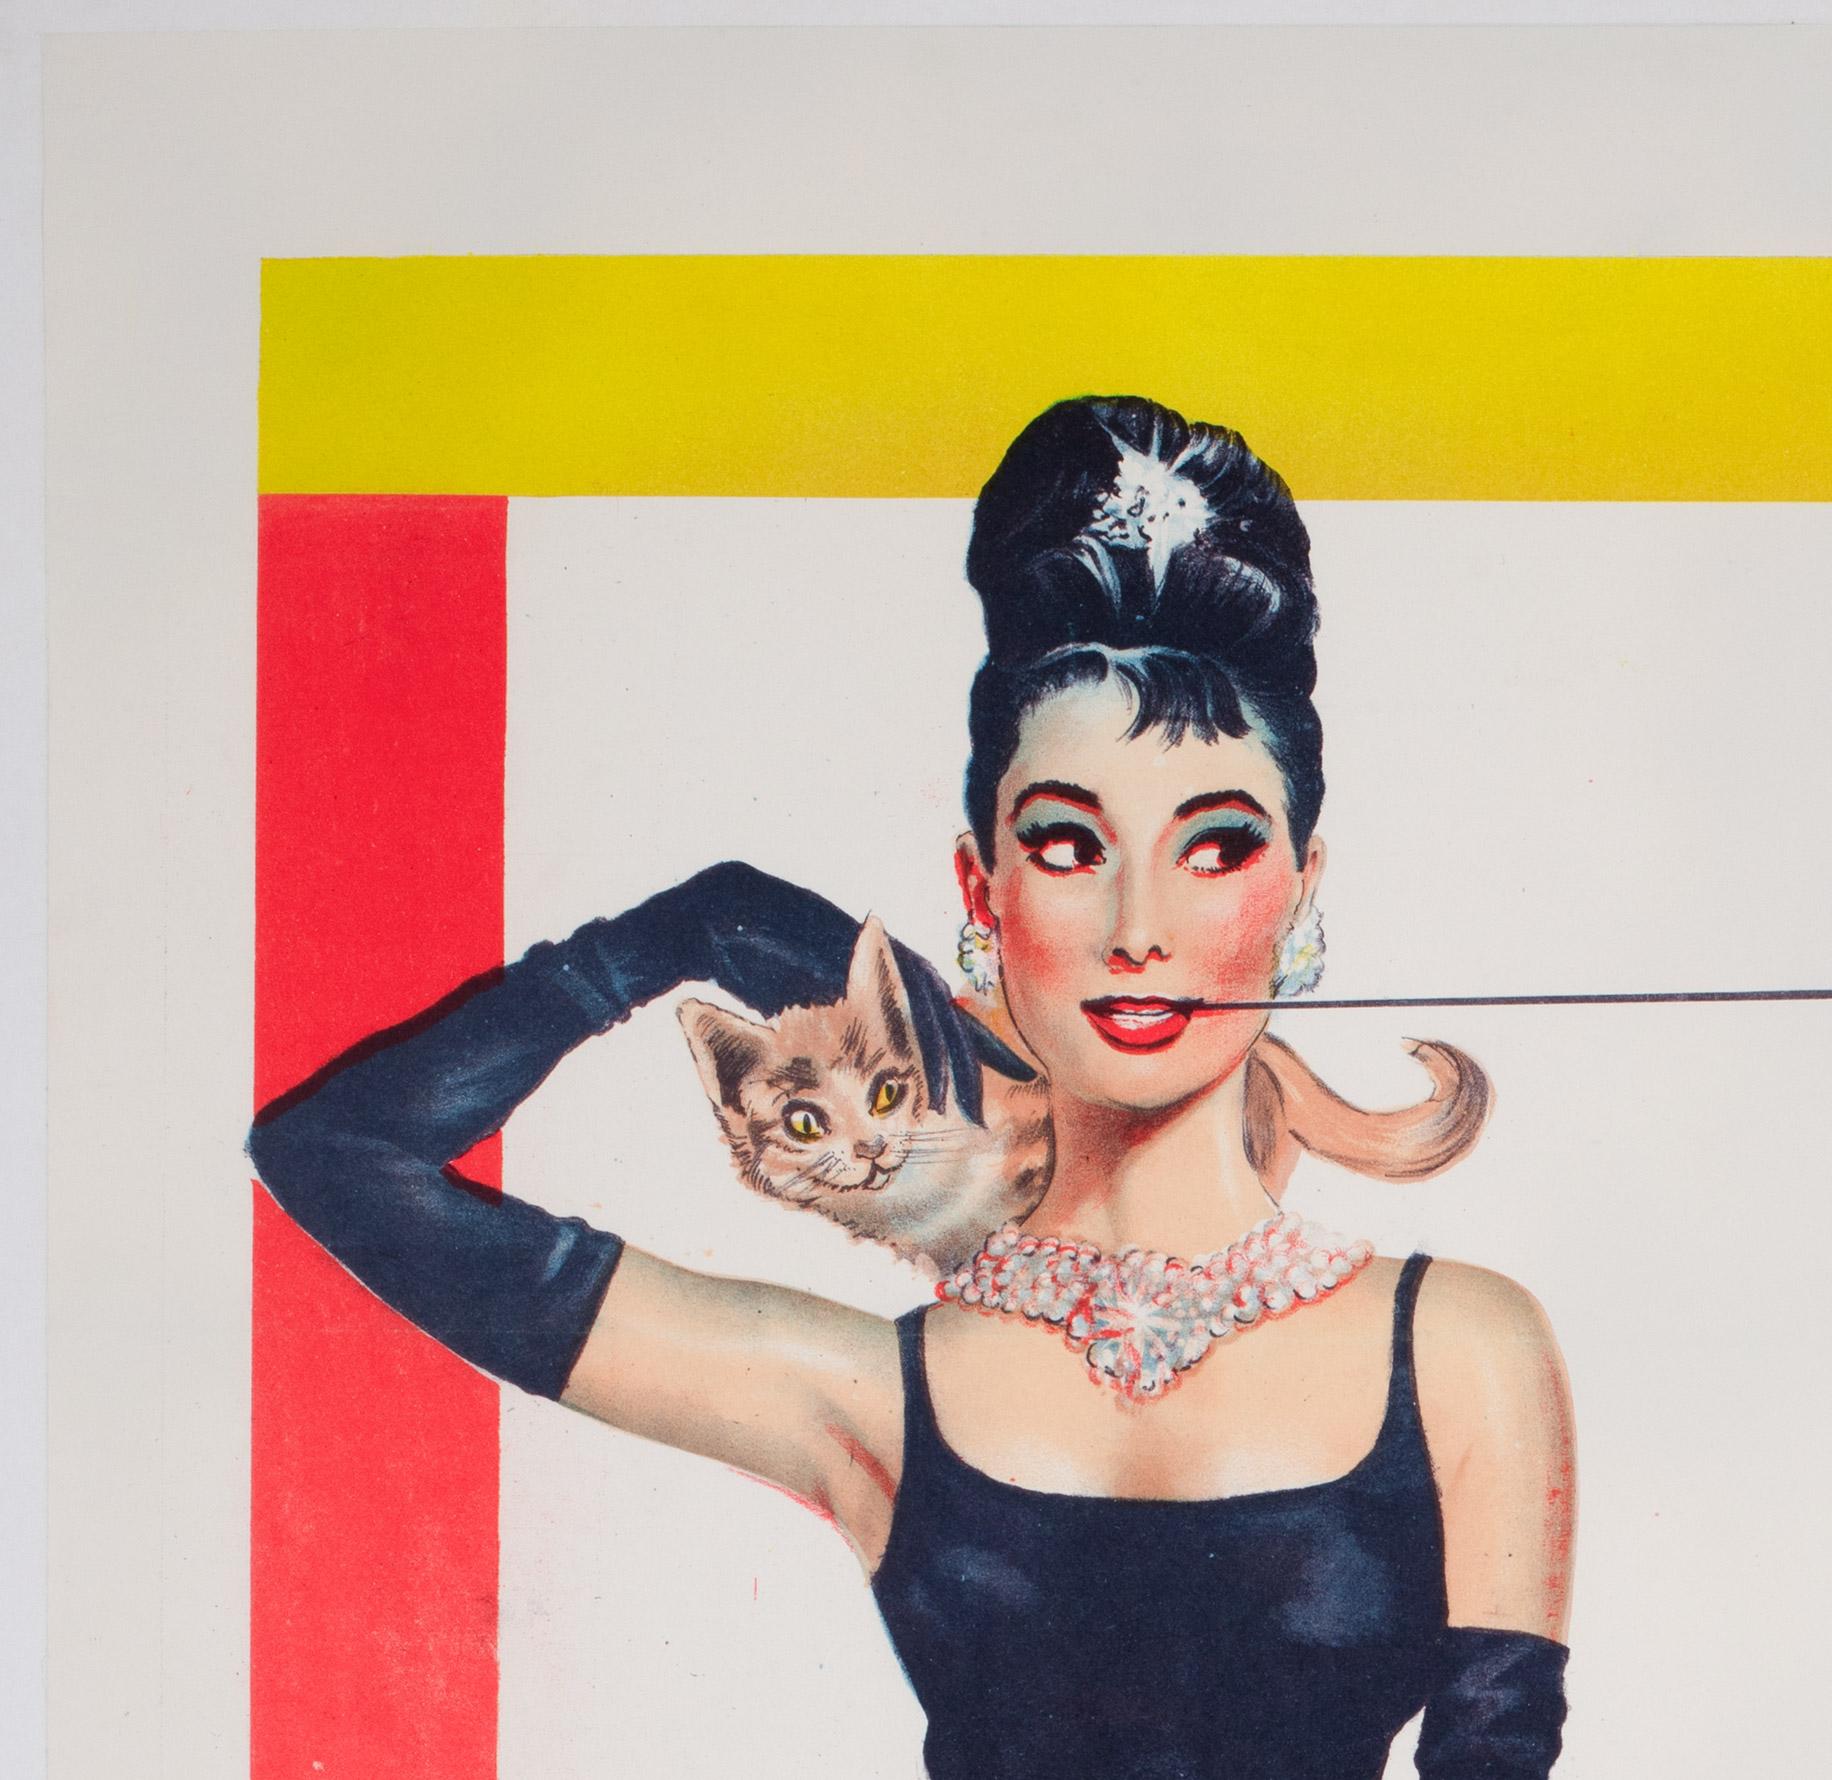 “It may be normal, darling; but I’d rather be natural.”
Fantastic, iconic artwork for the Argentinian film poster for 60s classic Breakfast at Tiffany's. 
A very fine and affordable alternative to the country-of-origin poster.

This original